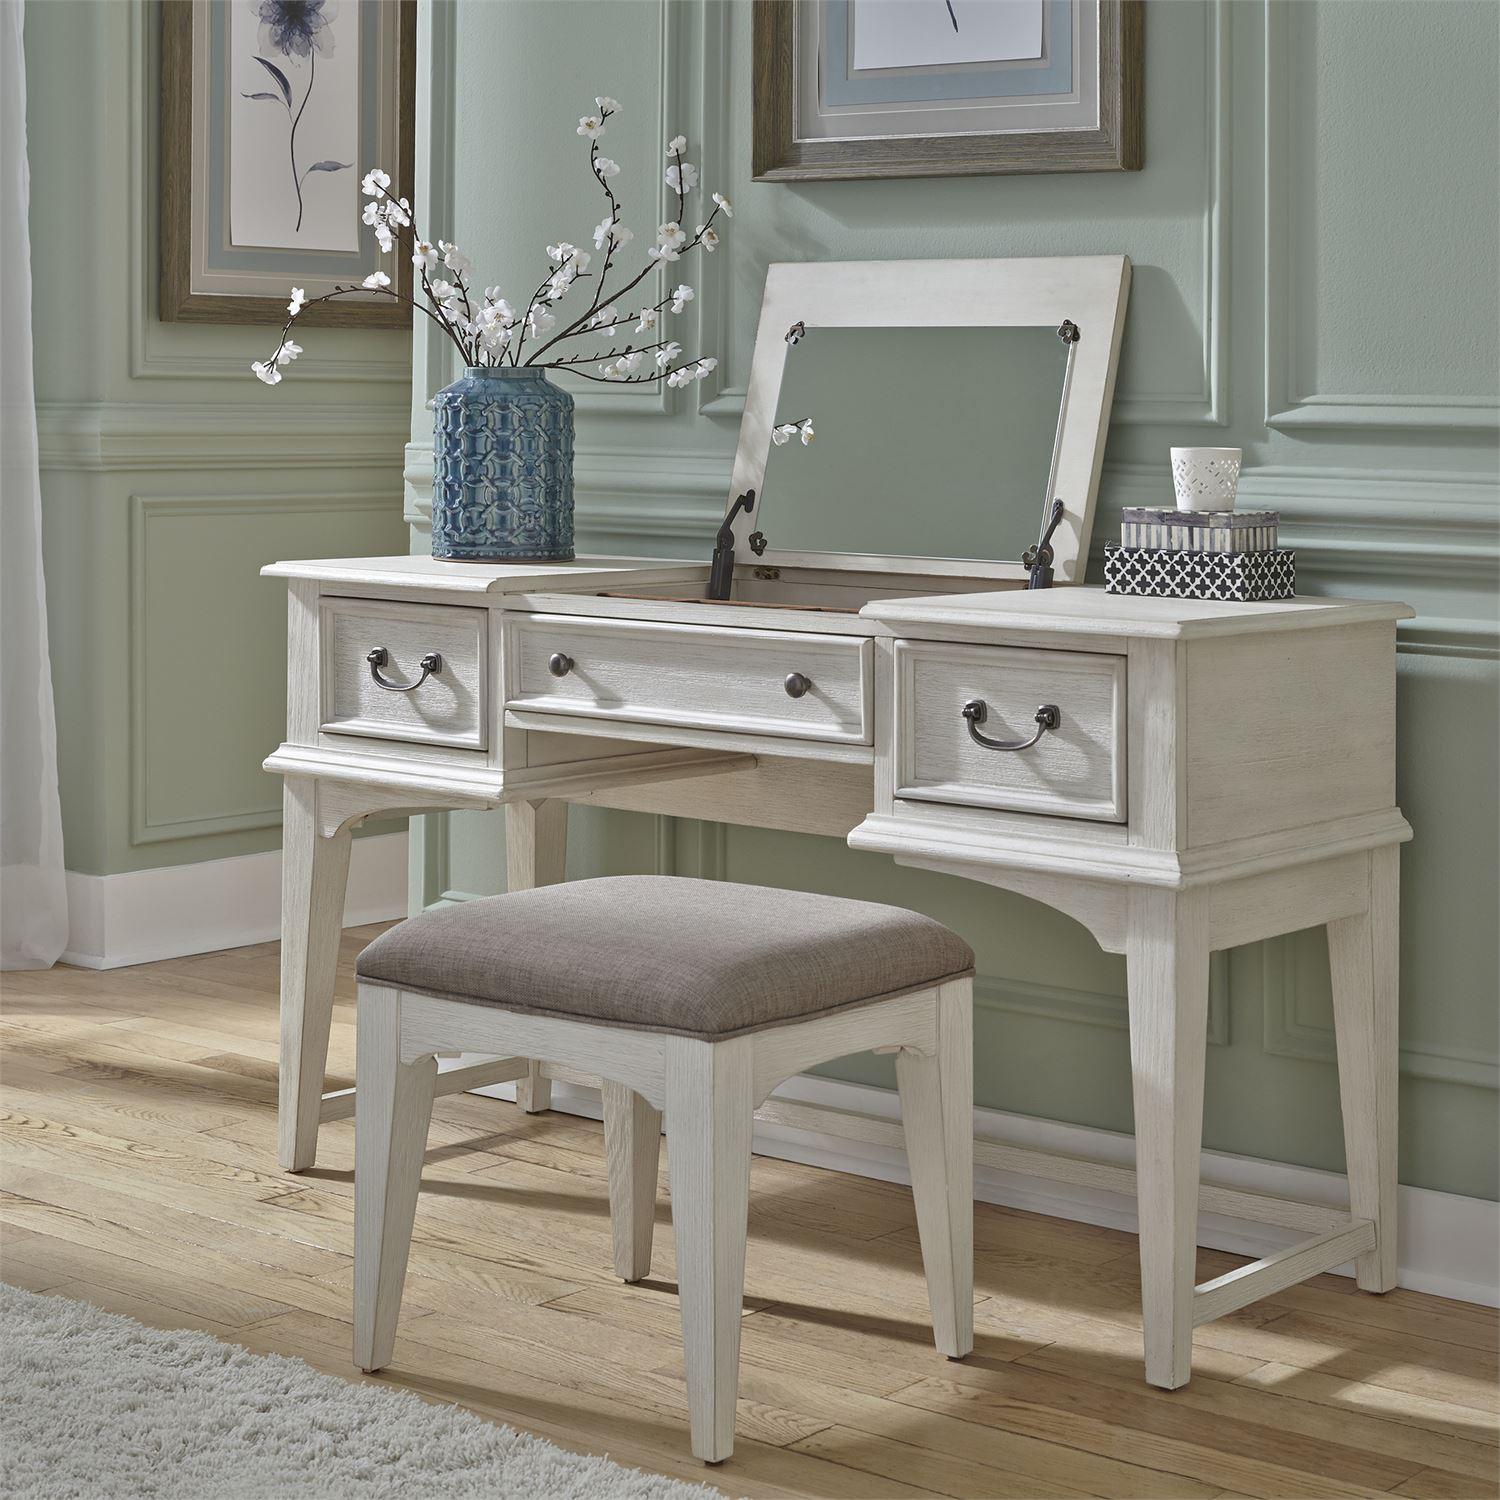 Transitional Vanity Bayside  249-BR35 249-BR35 in White 